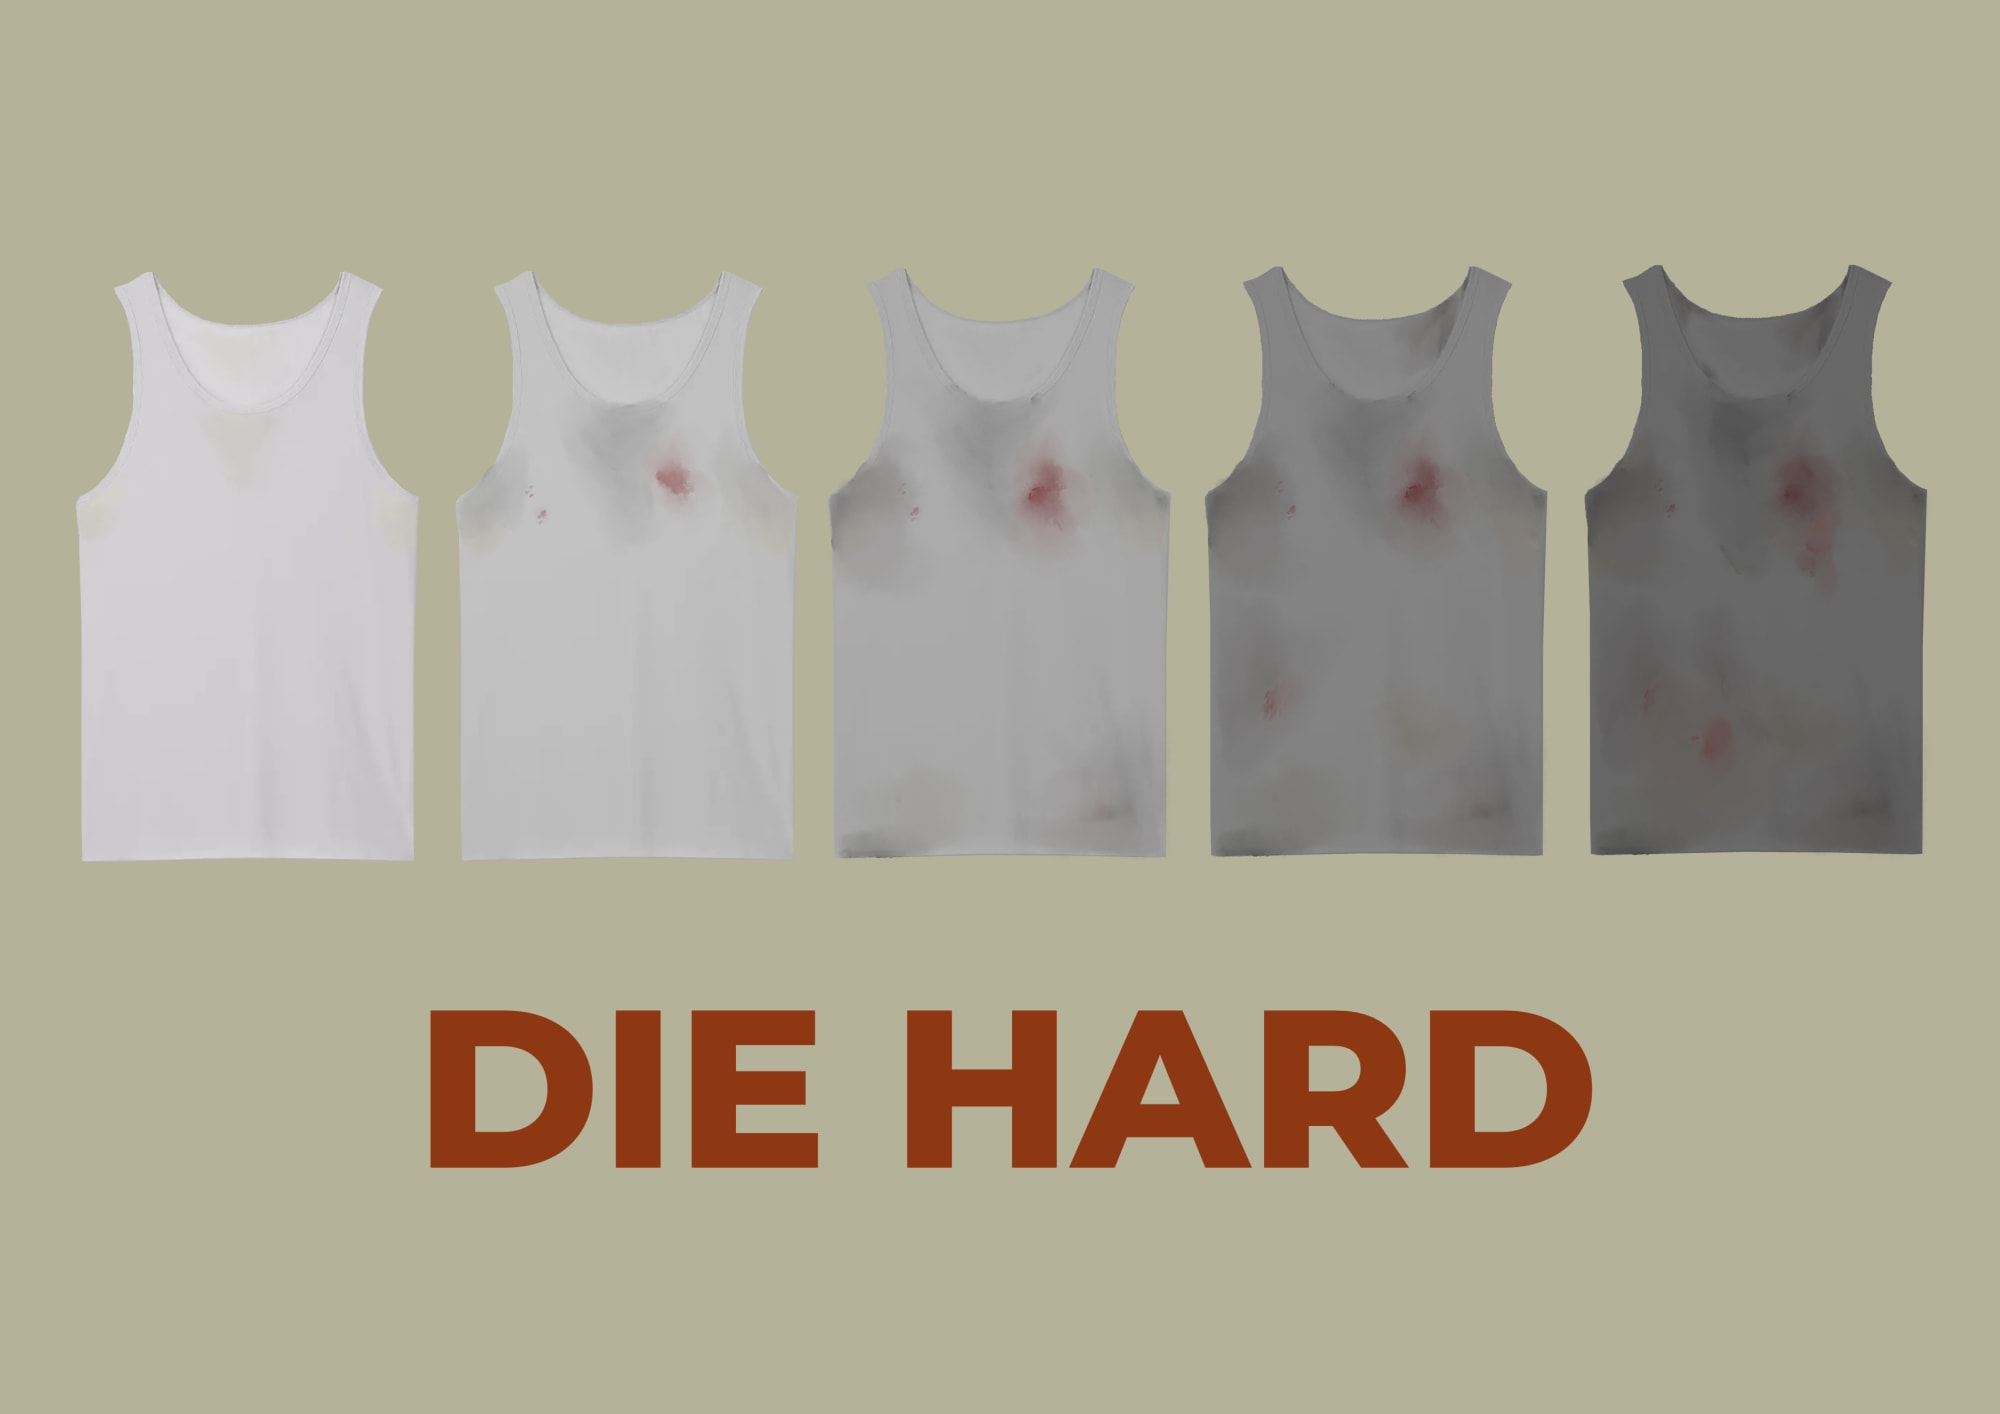 A white vest at various stages of dirt, oil and blood stains